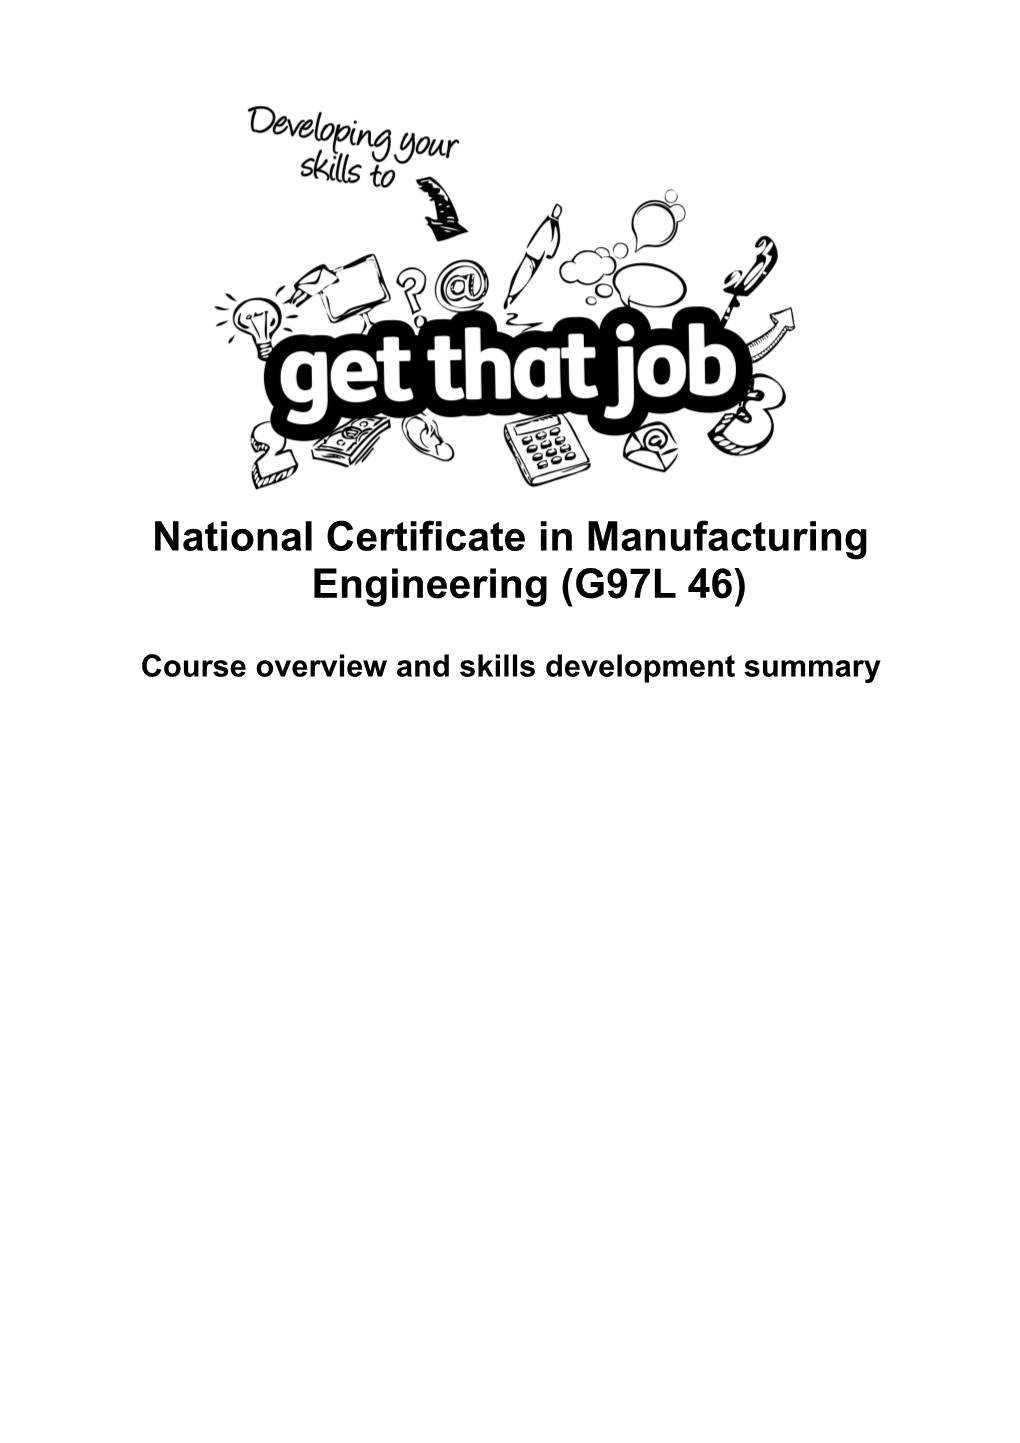 National Certificate in Manufacturing Engineering (G97L 46)